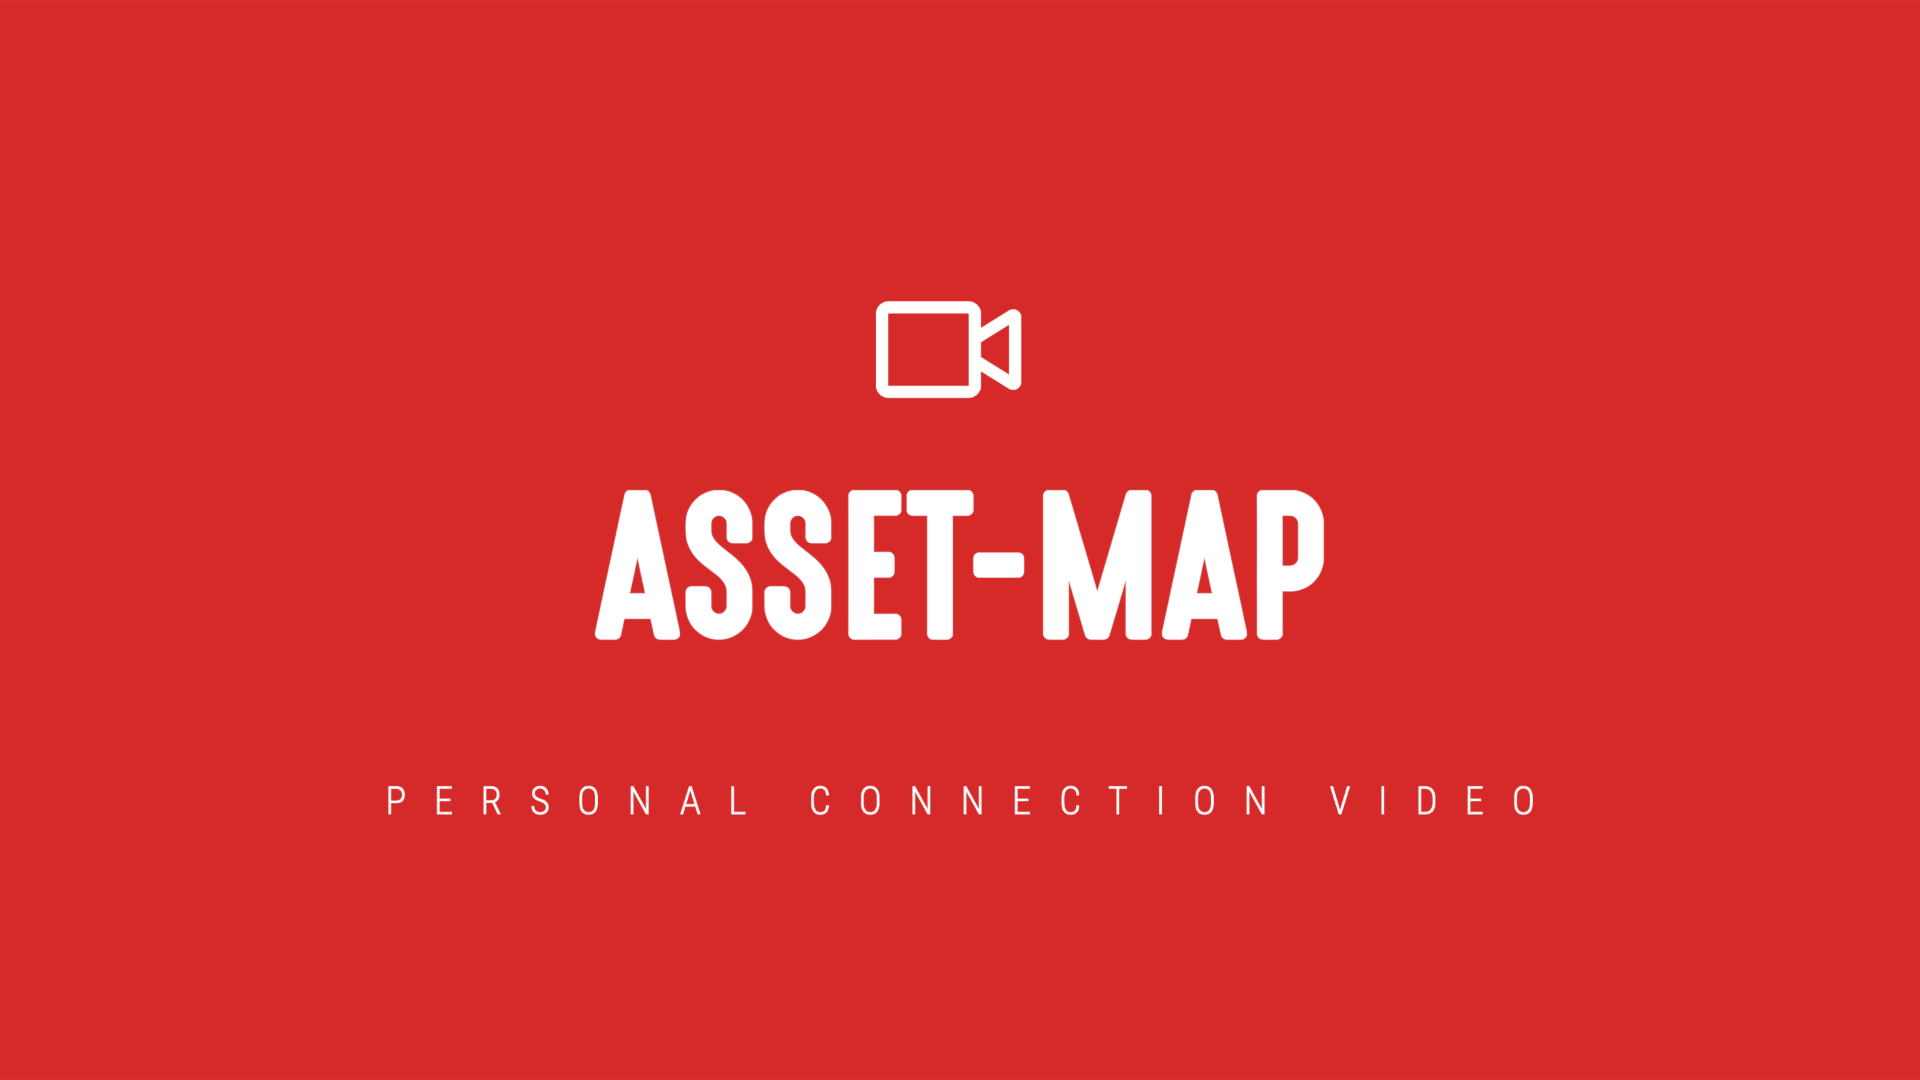 [NEW] Personal Connection Video | Asset-Map